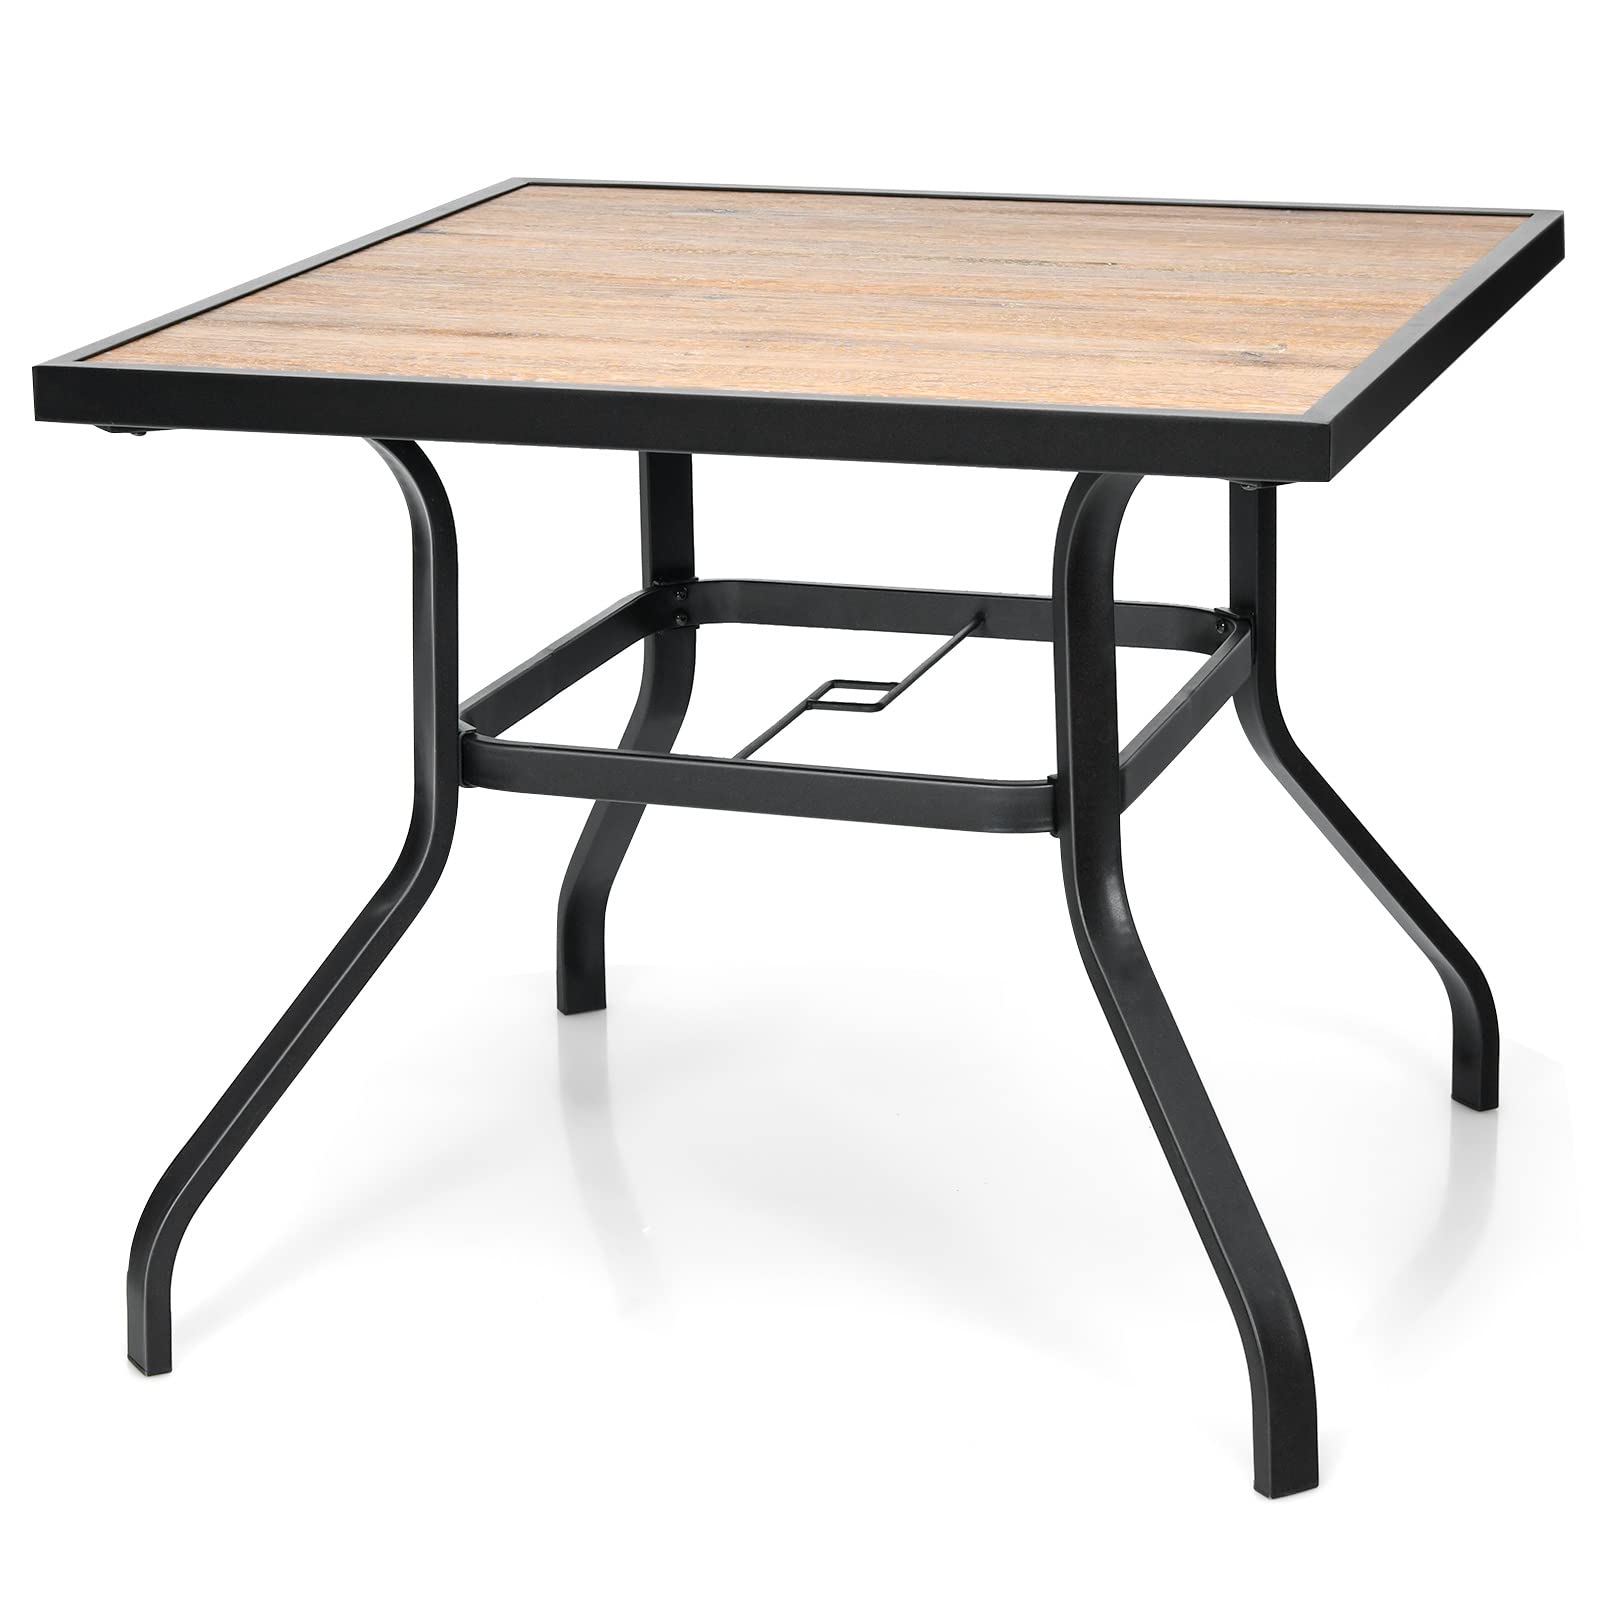 Patio Dining Table, Outdoor Square Bistro Table